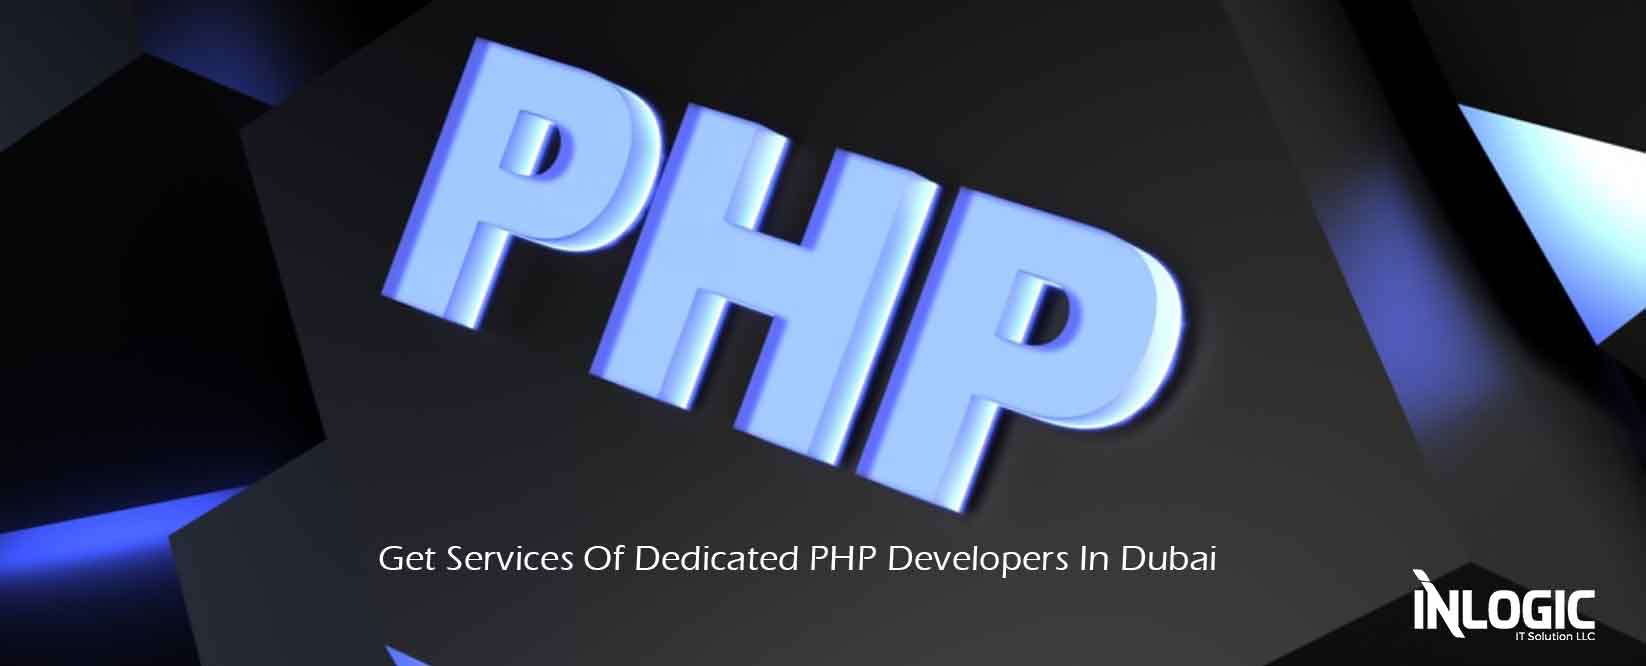 Get Services Of Dedicated PHP Developers In Dubai